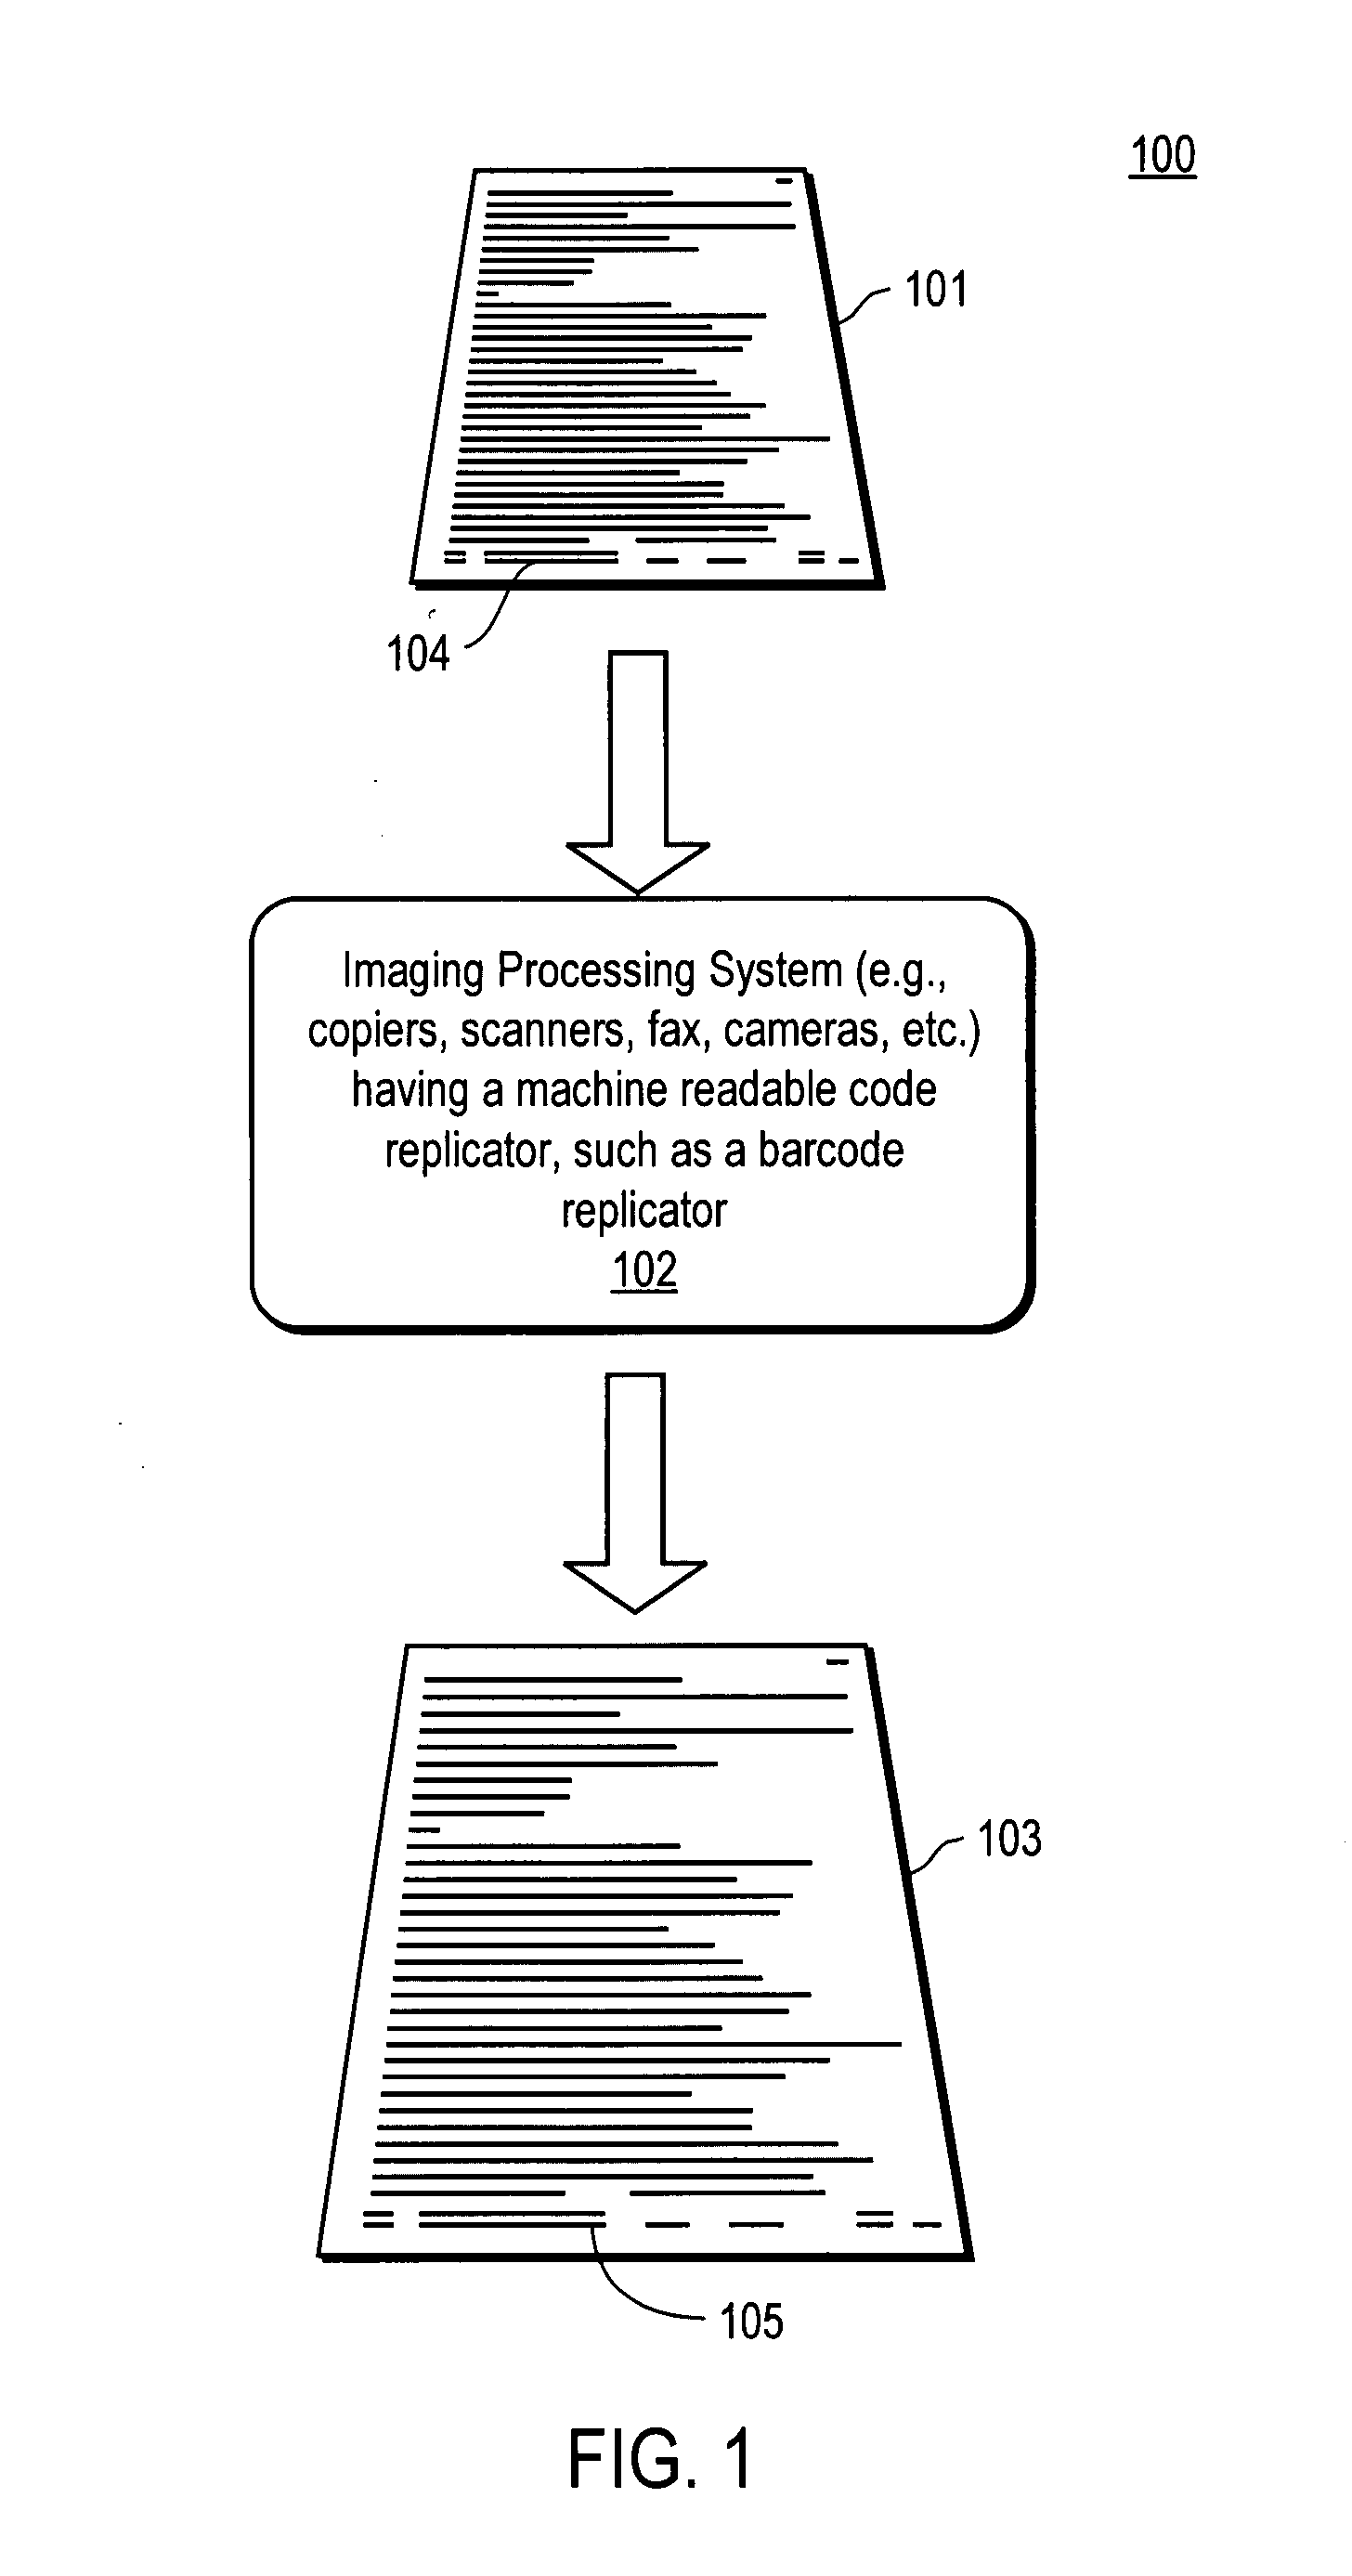 Automatic cleanup of machine readable codes during image processing